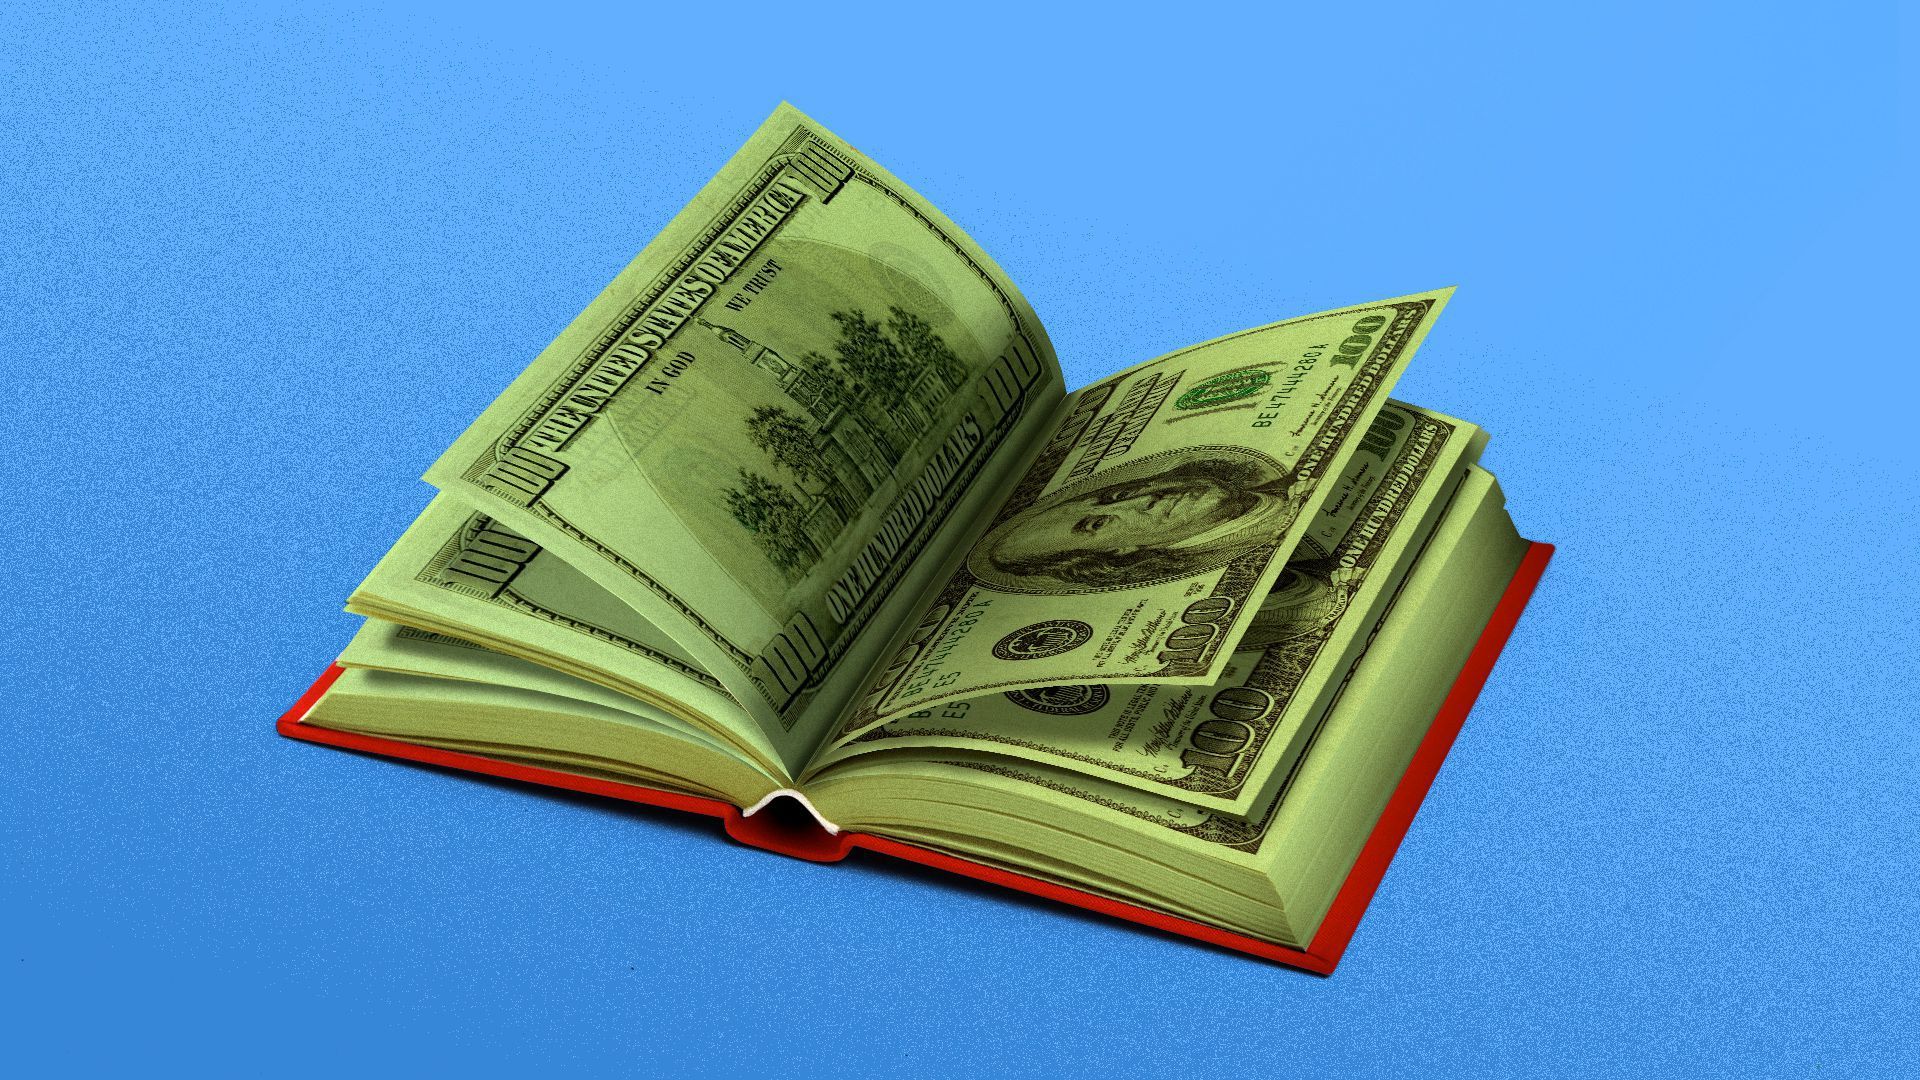 Illustration of a book with $100 bills as pages